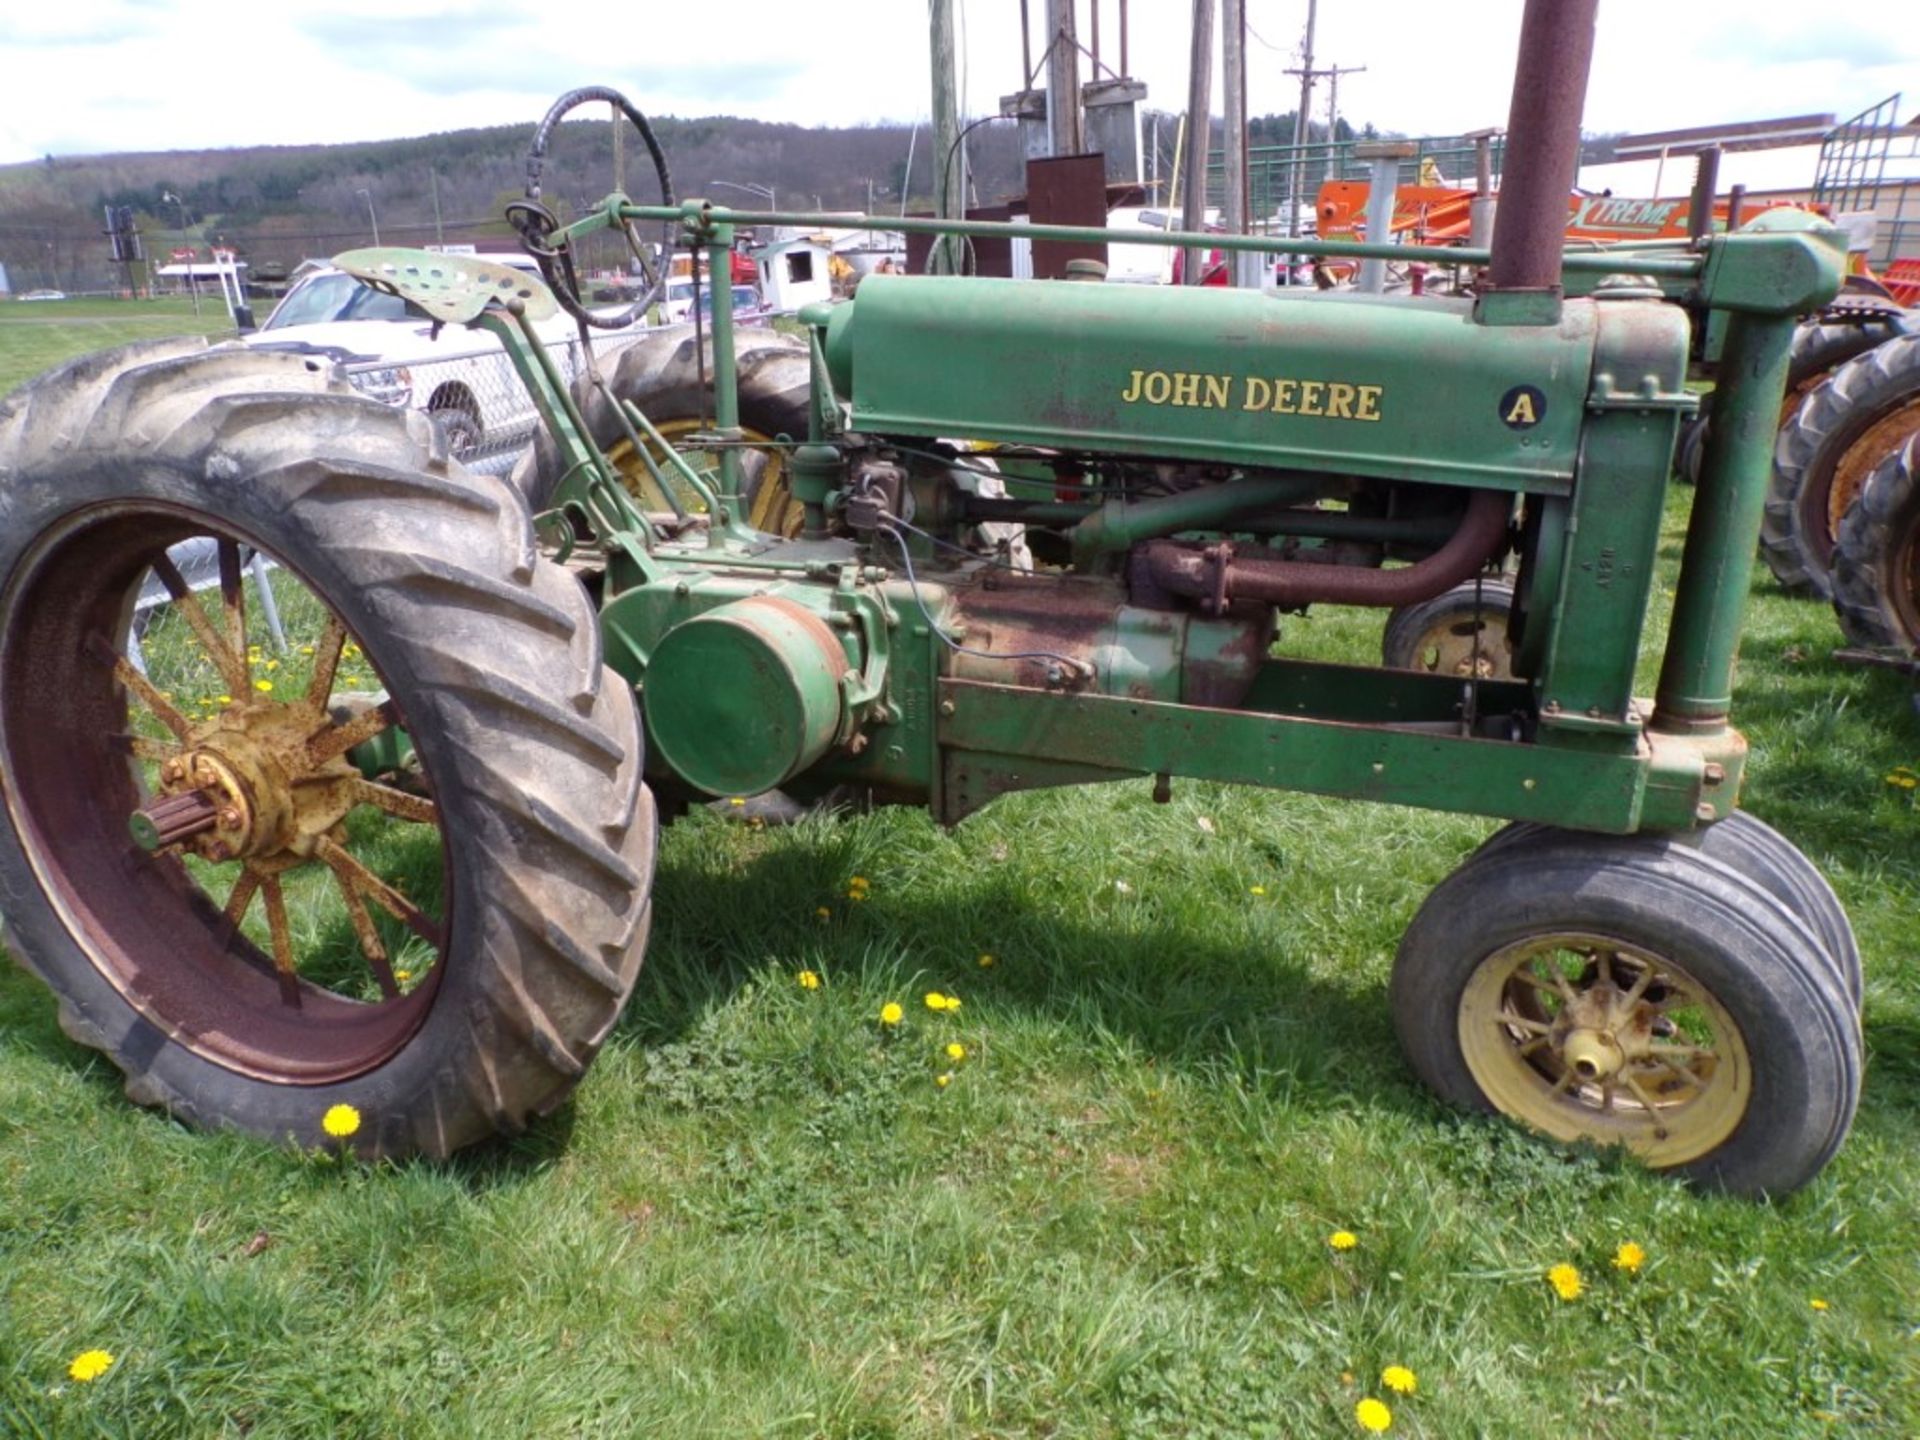 JD A - Unstyled, Spoke Rubber Wheels - Not Running, Needs Work (4307) - Image 2 of 2